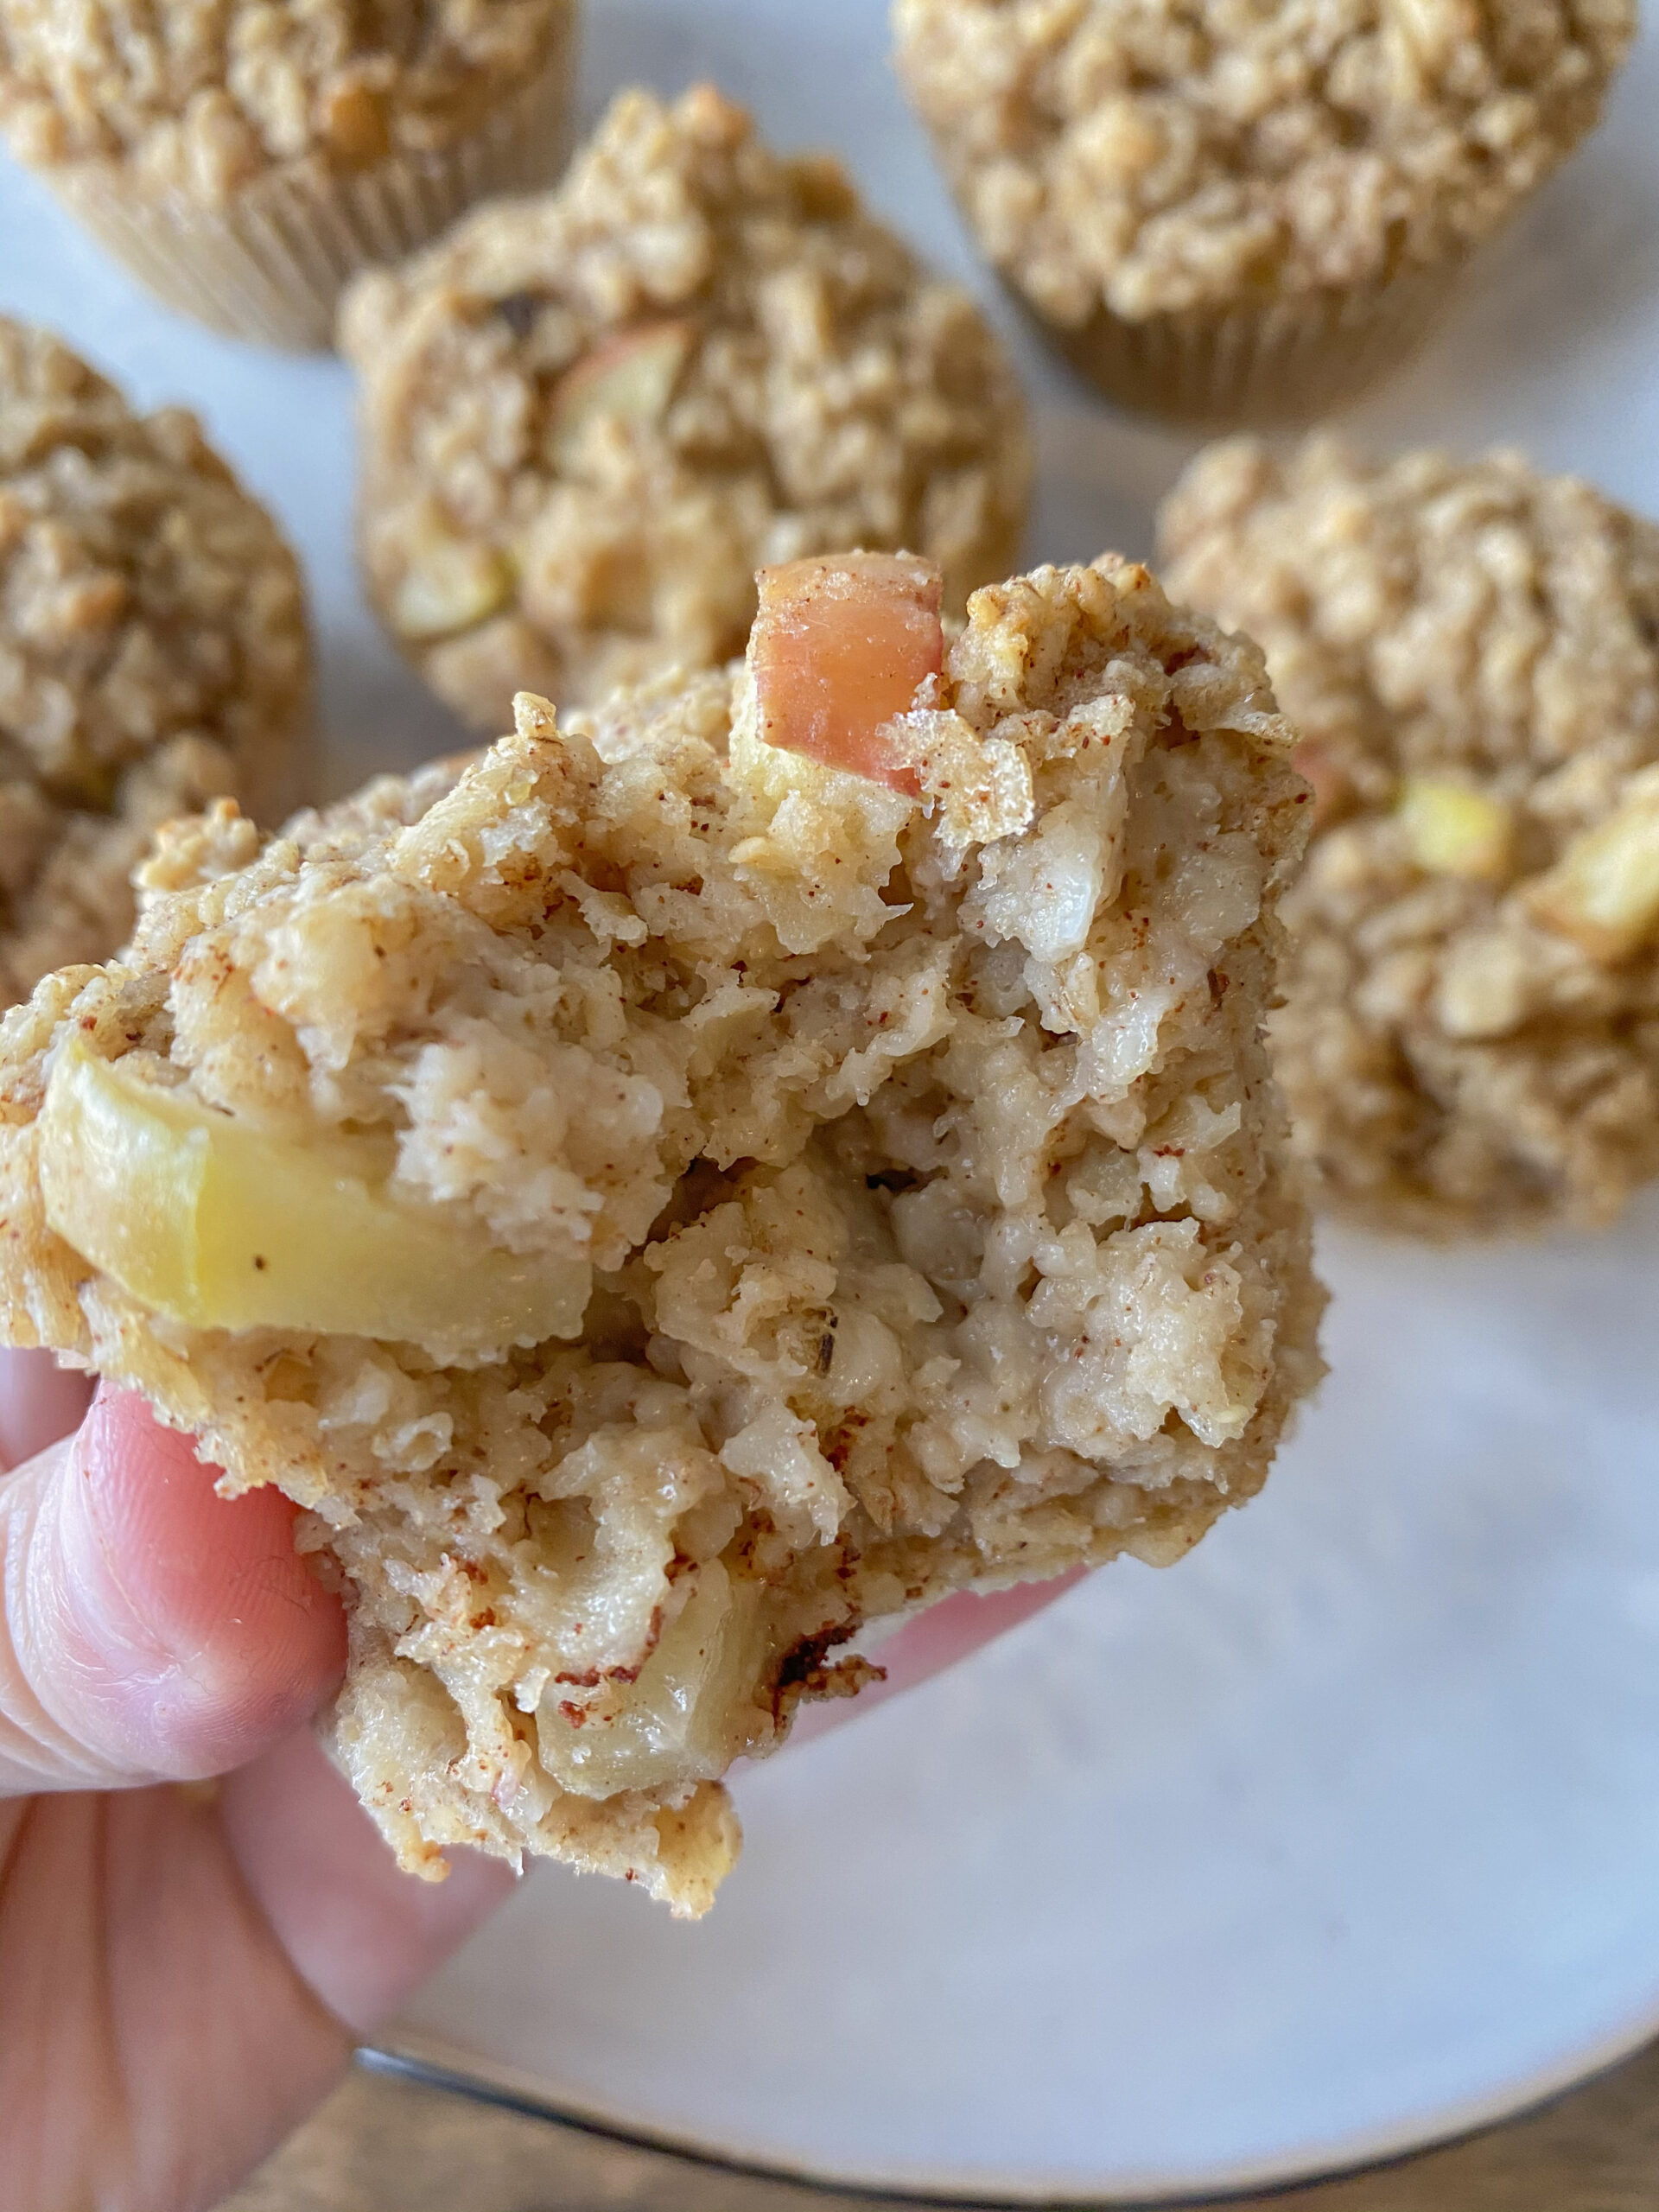 Vegan Apple Cinnamon Baked Oatmeal Muffins - Peanut Butter and Jilly